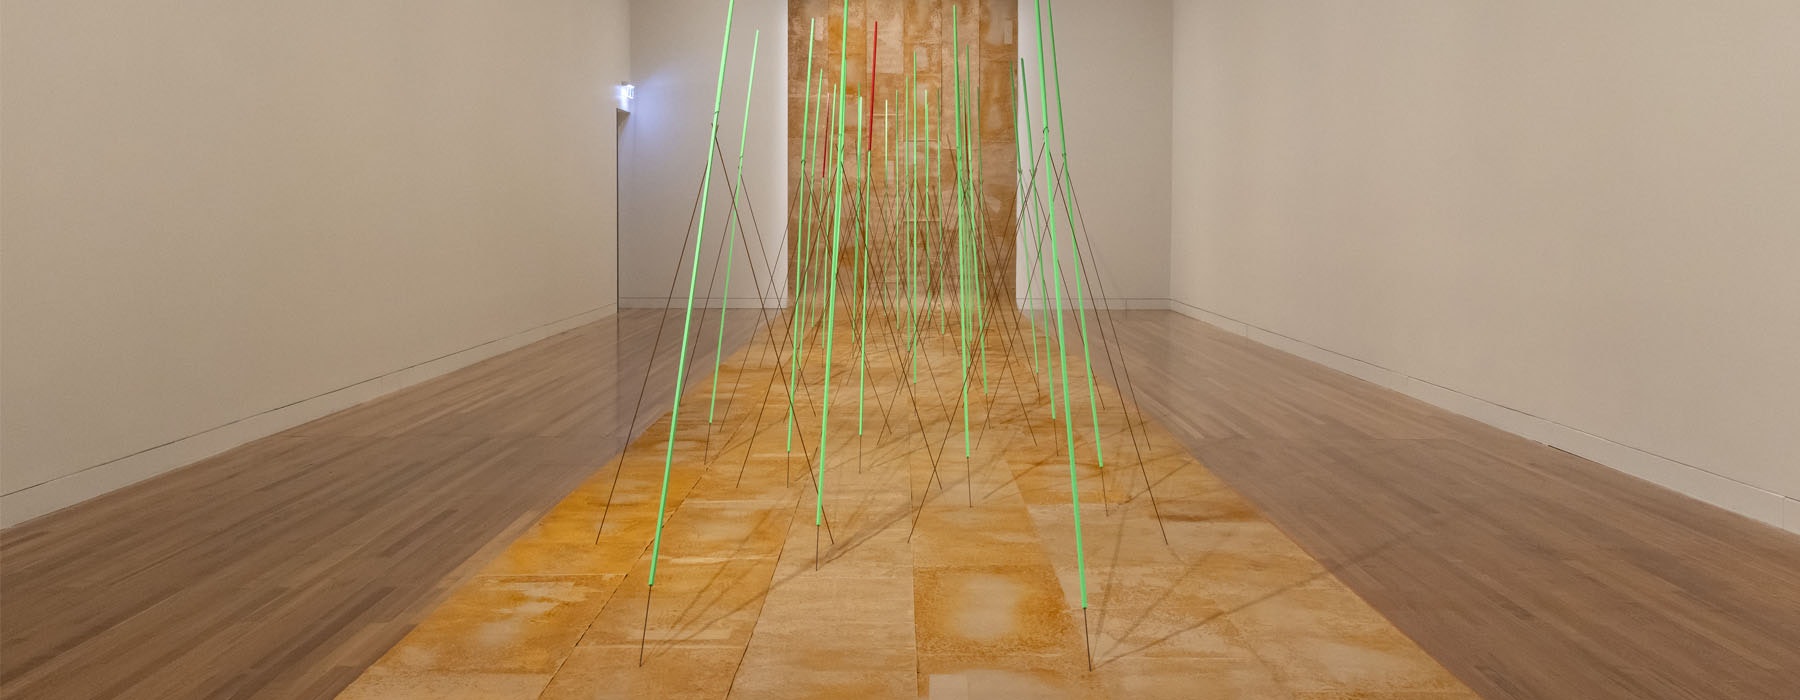 Installation view of the artwork “Extensum/Extensor”. It comprises of a long sheet of rusted paper which hangs from the ceiling and rolls out across the floor. On the floor part of the paper, thins rods in floor green stick out, like hairs